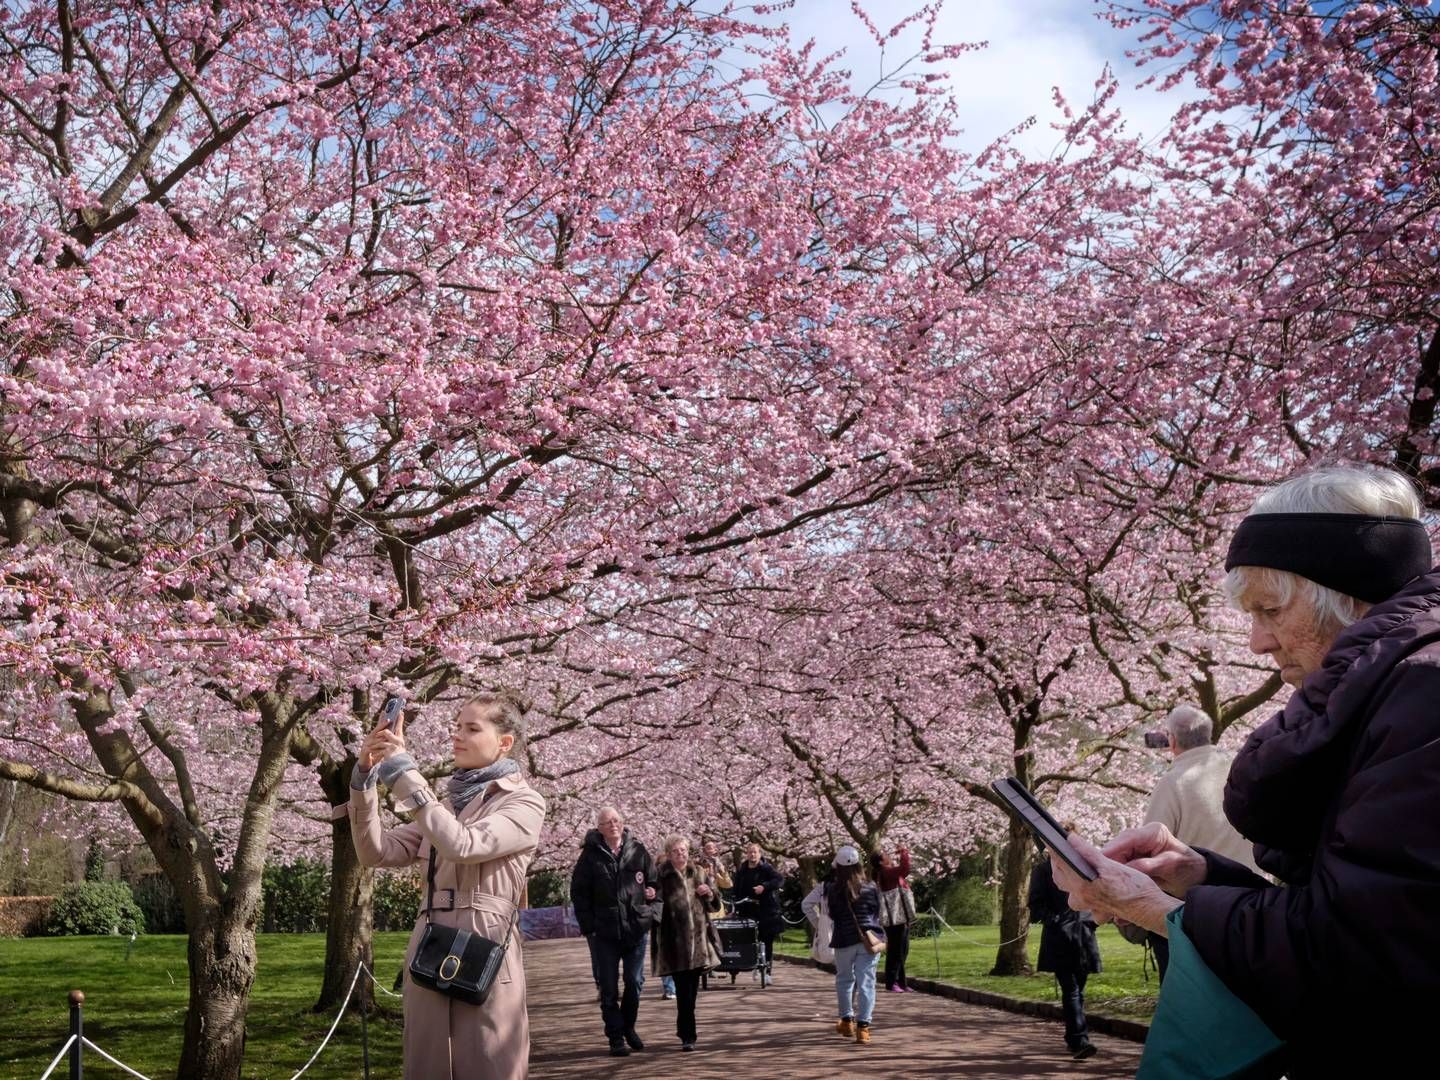 Every year in April, cherry trees blooming attract thousands of visitors to Bispebjerg Cemetary on the outskirts of Copenhagen. | Foto: Jens Dresling/Ritzau Scanpix